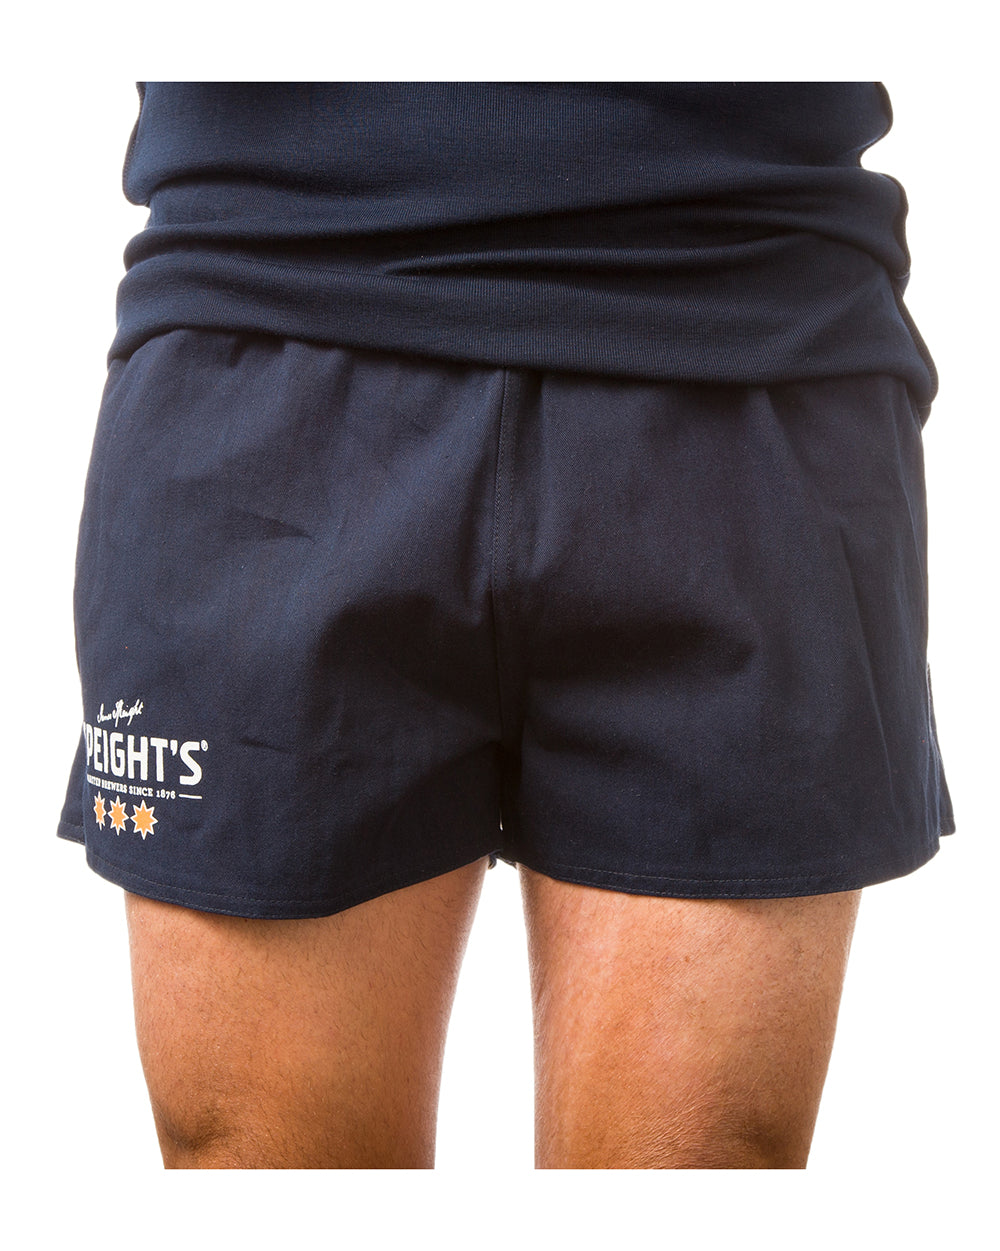 Speight's Rugby Shorts - Wear It Proud NZL